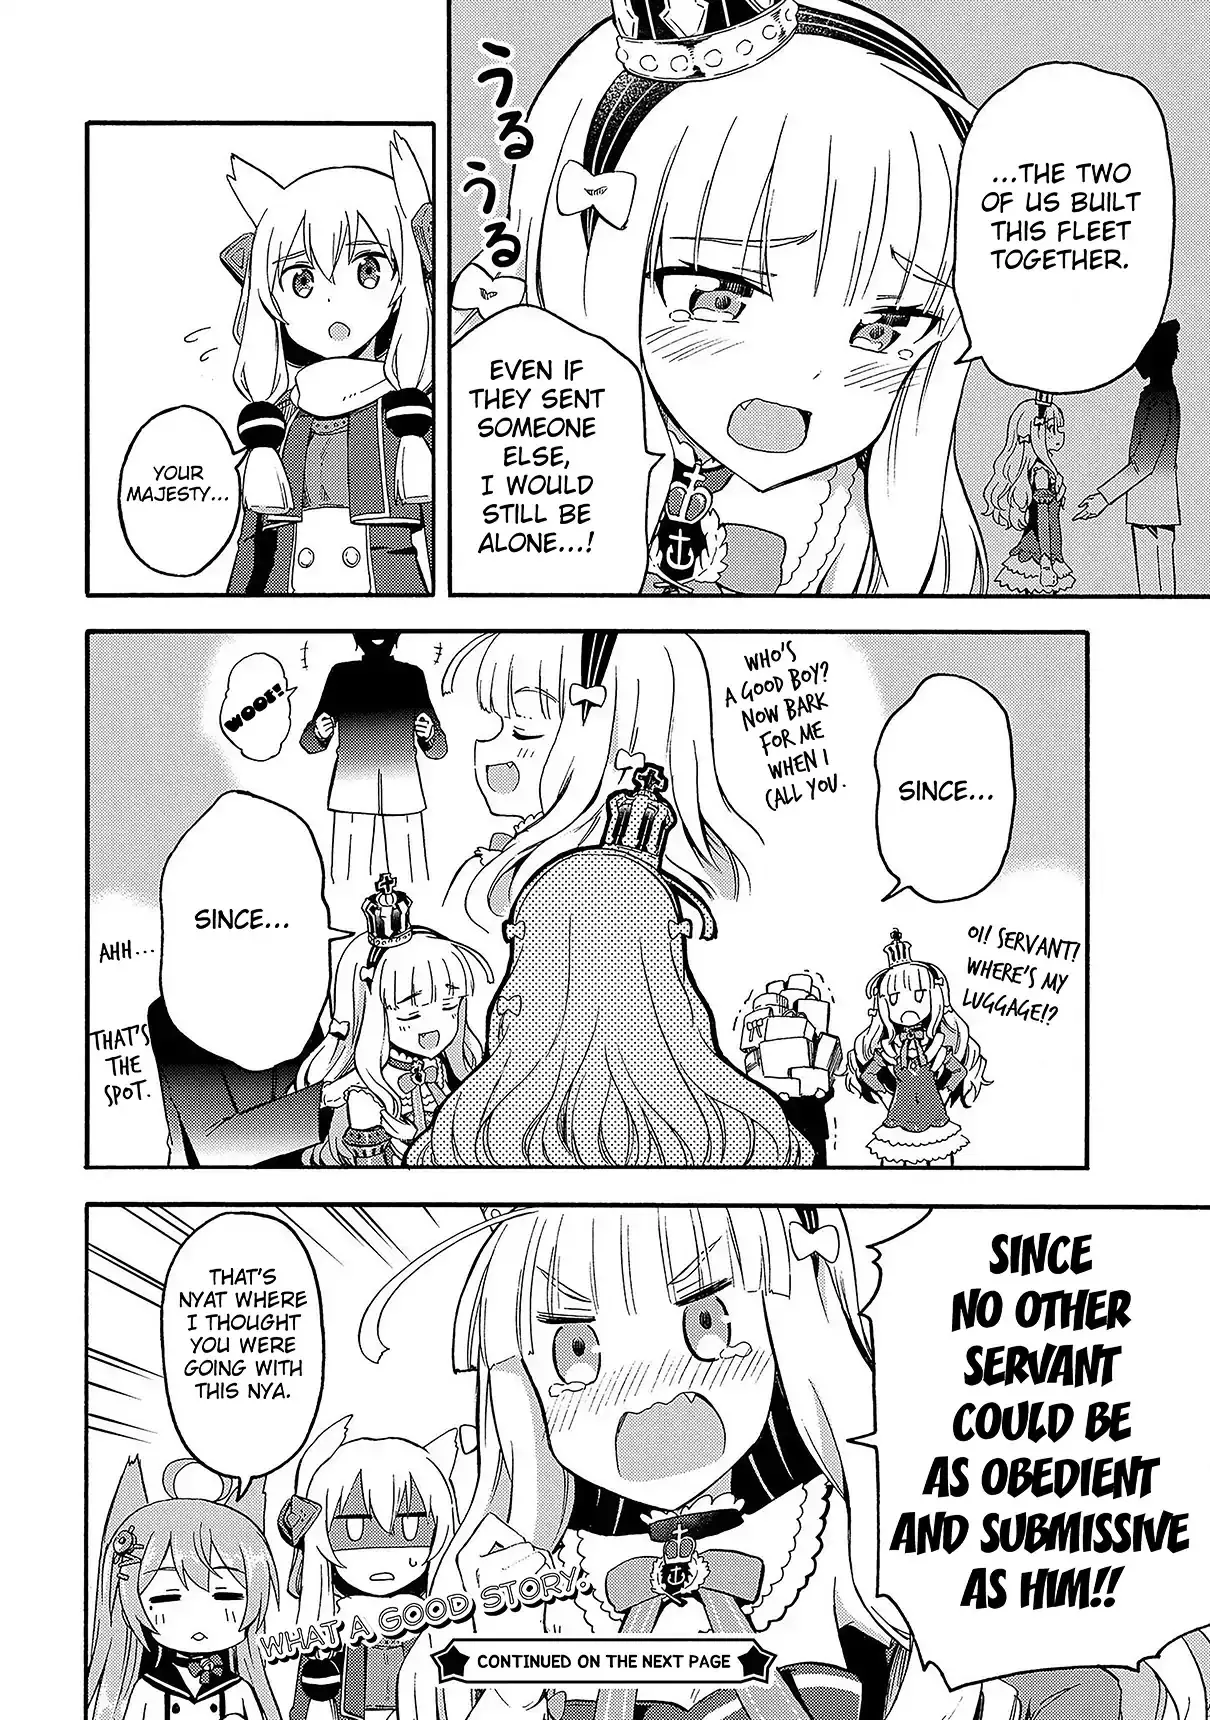 Azur Lane: Queen's Orders - 2 page 4-1bd7b114